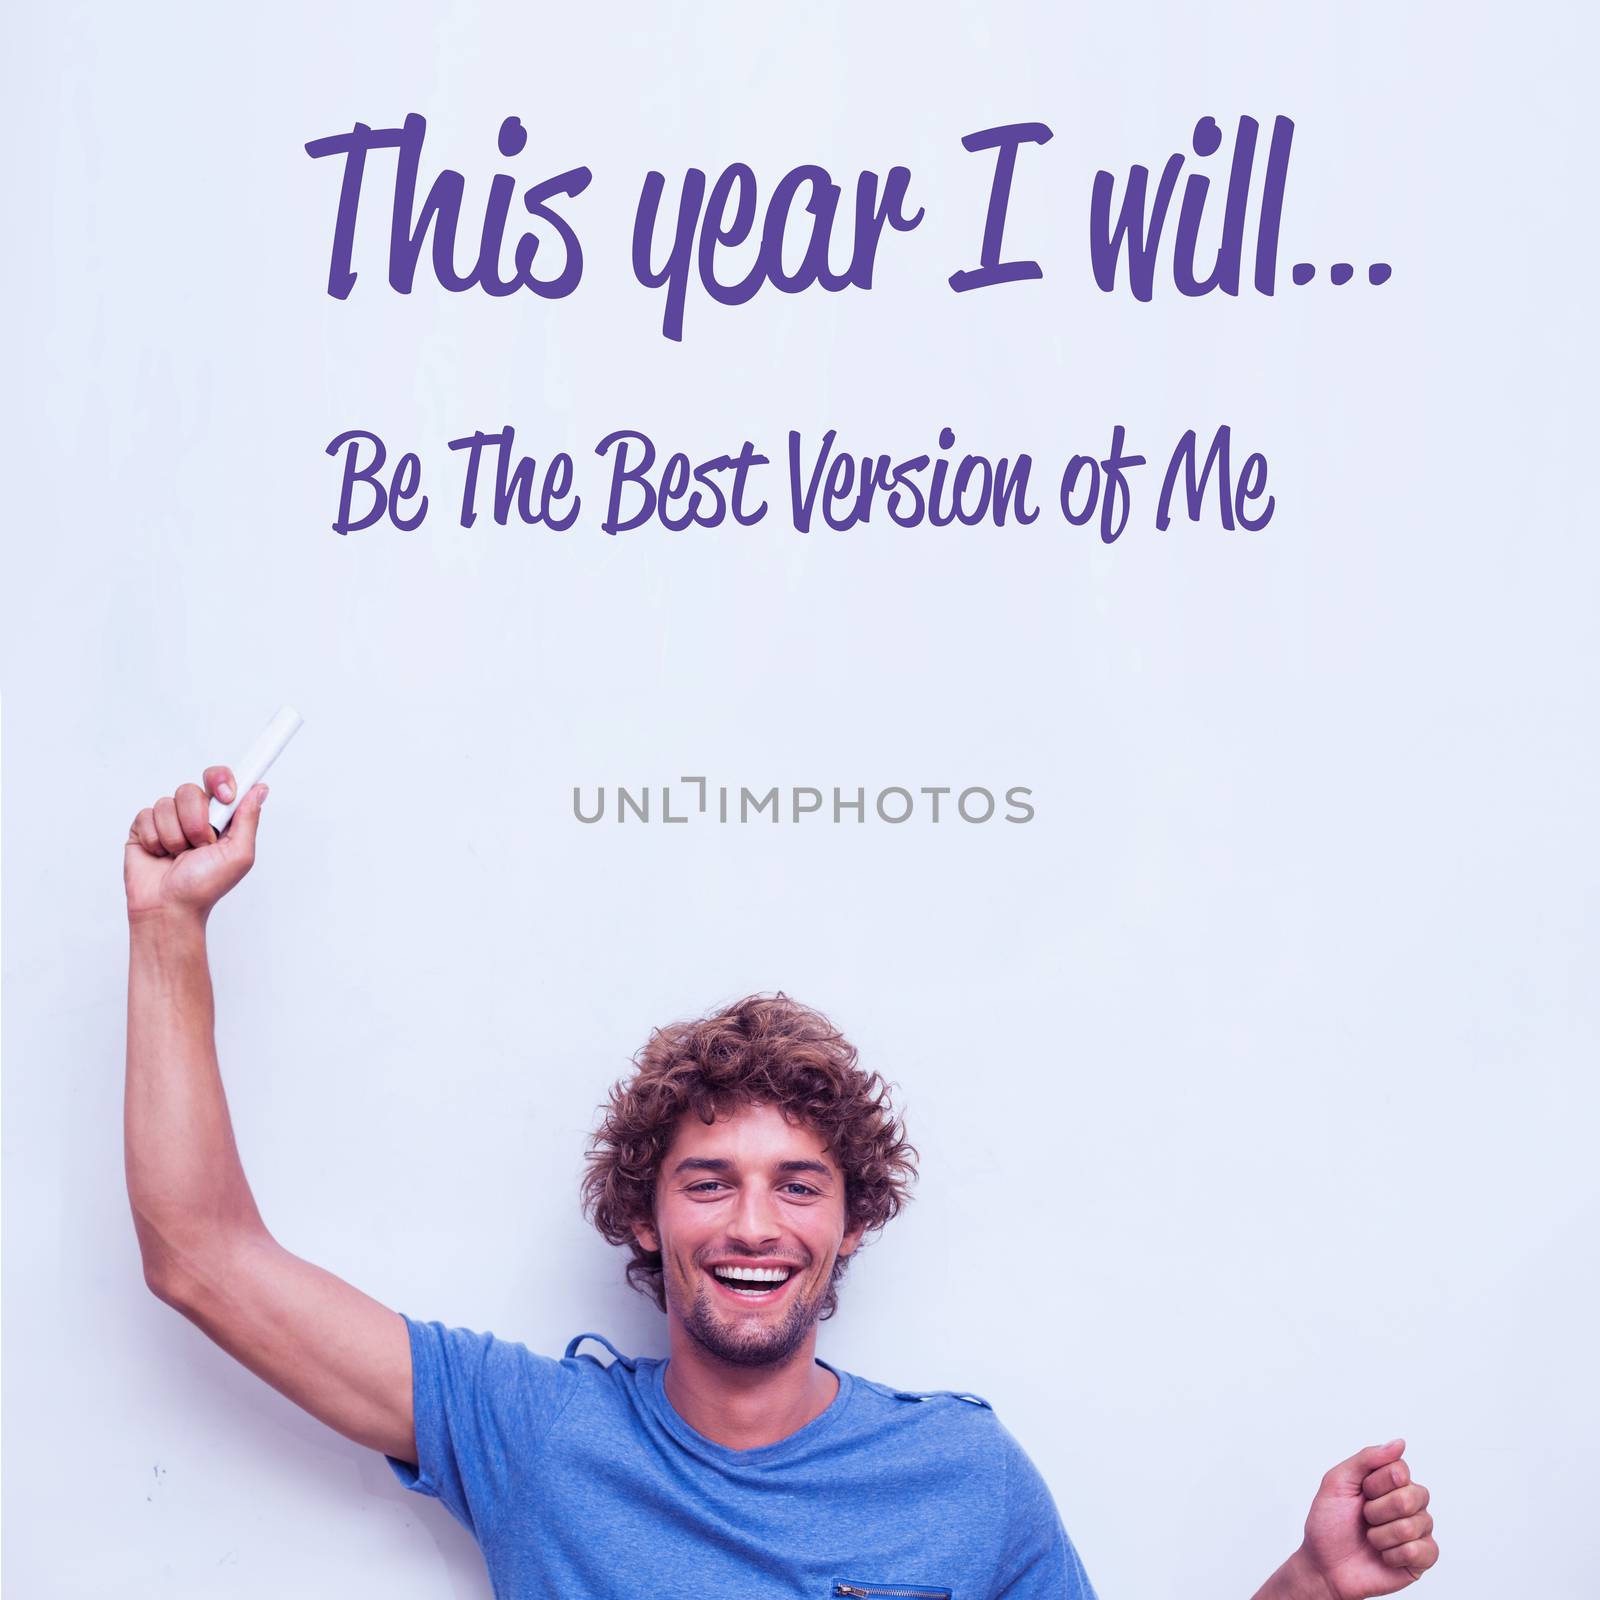 Composite image of this year i will by Wavebreakmedia